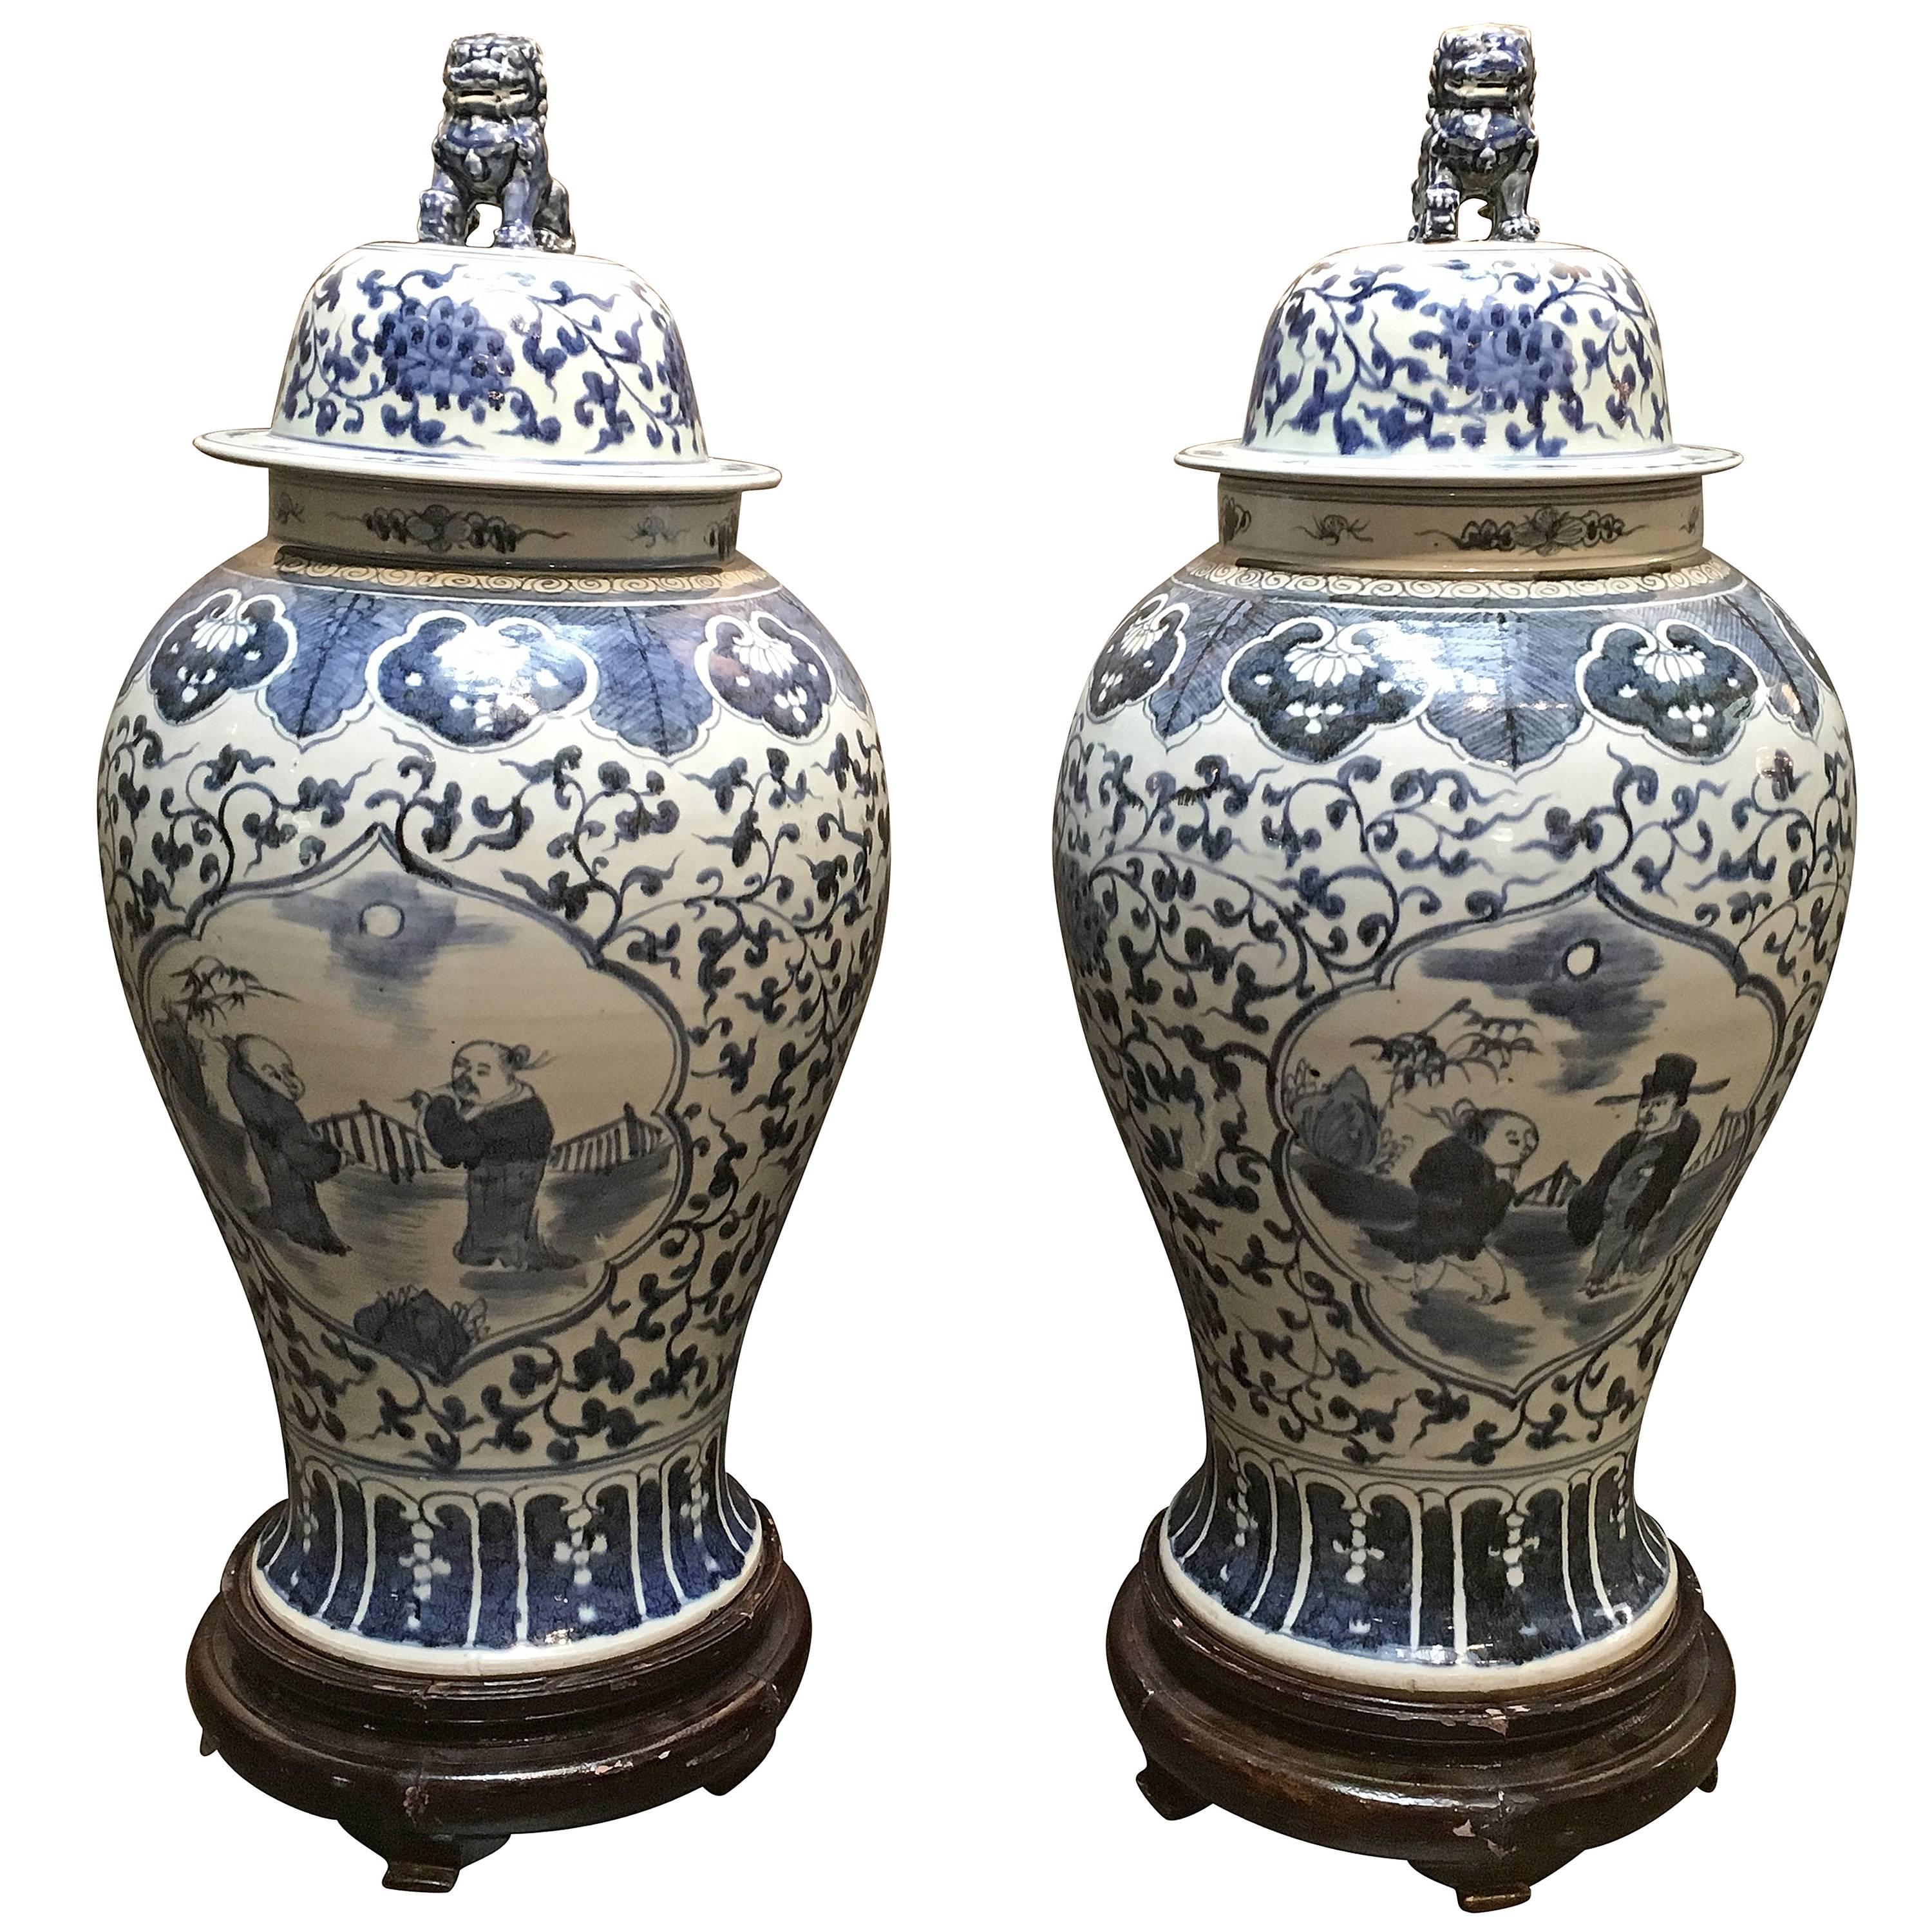 Pair of Large Chinese Blue and White Baluster Covered Jars